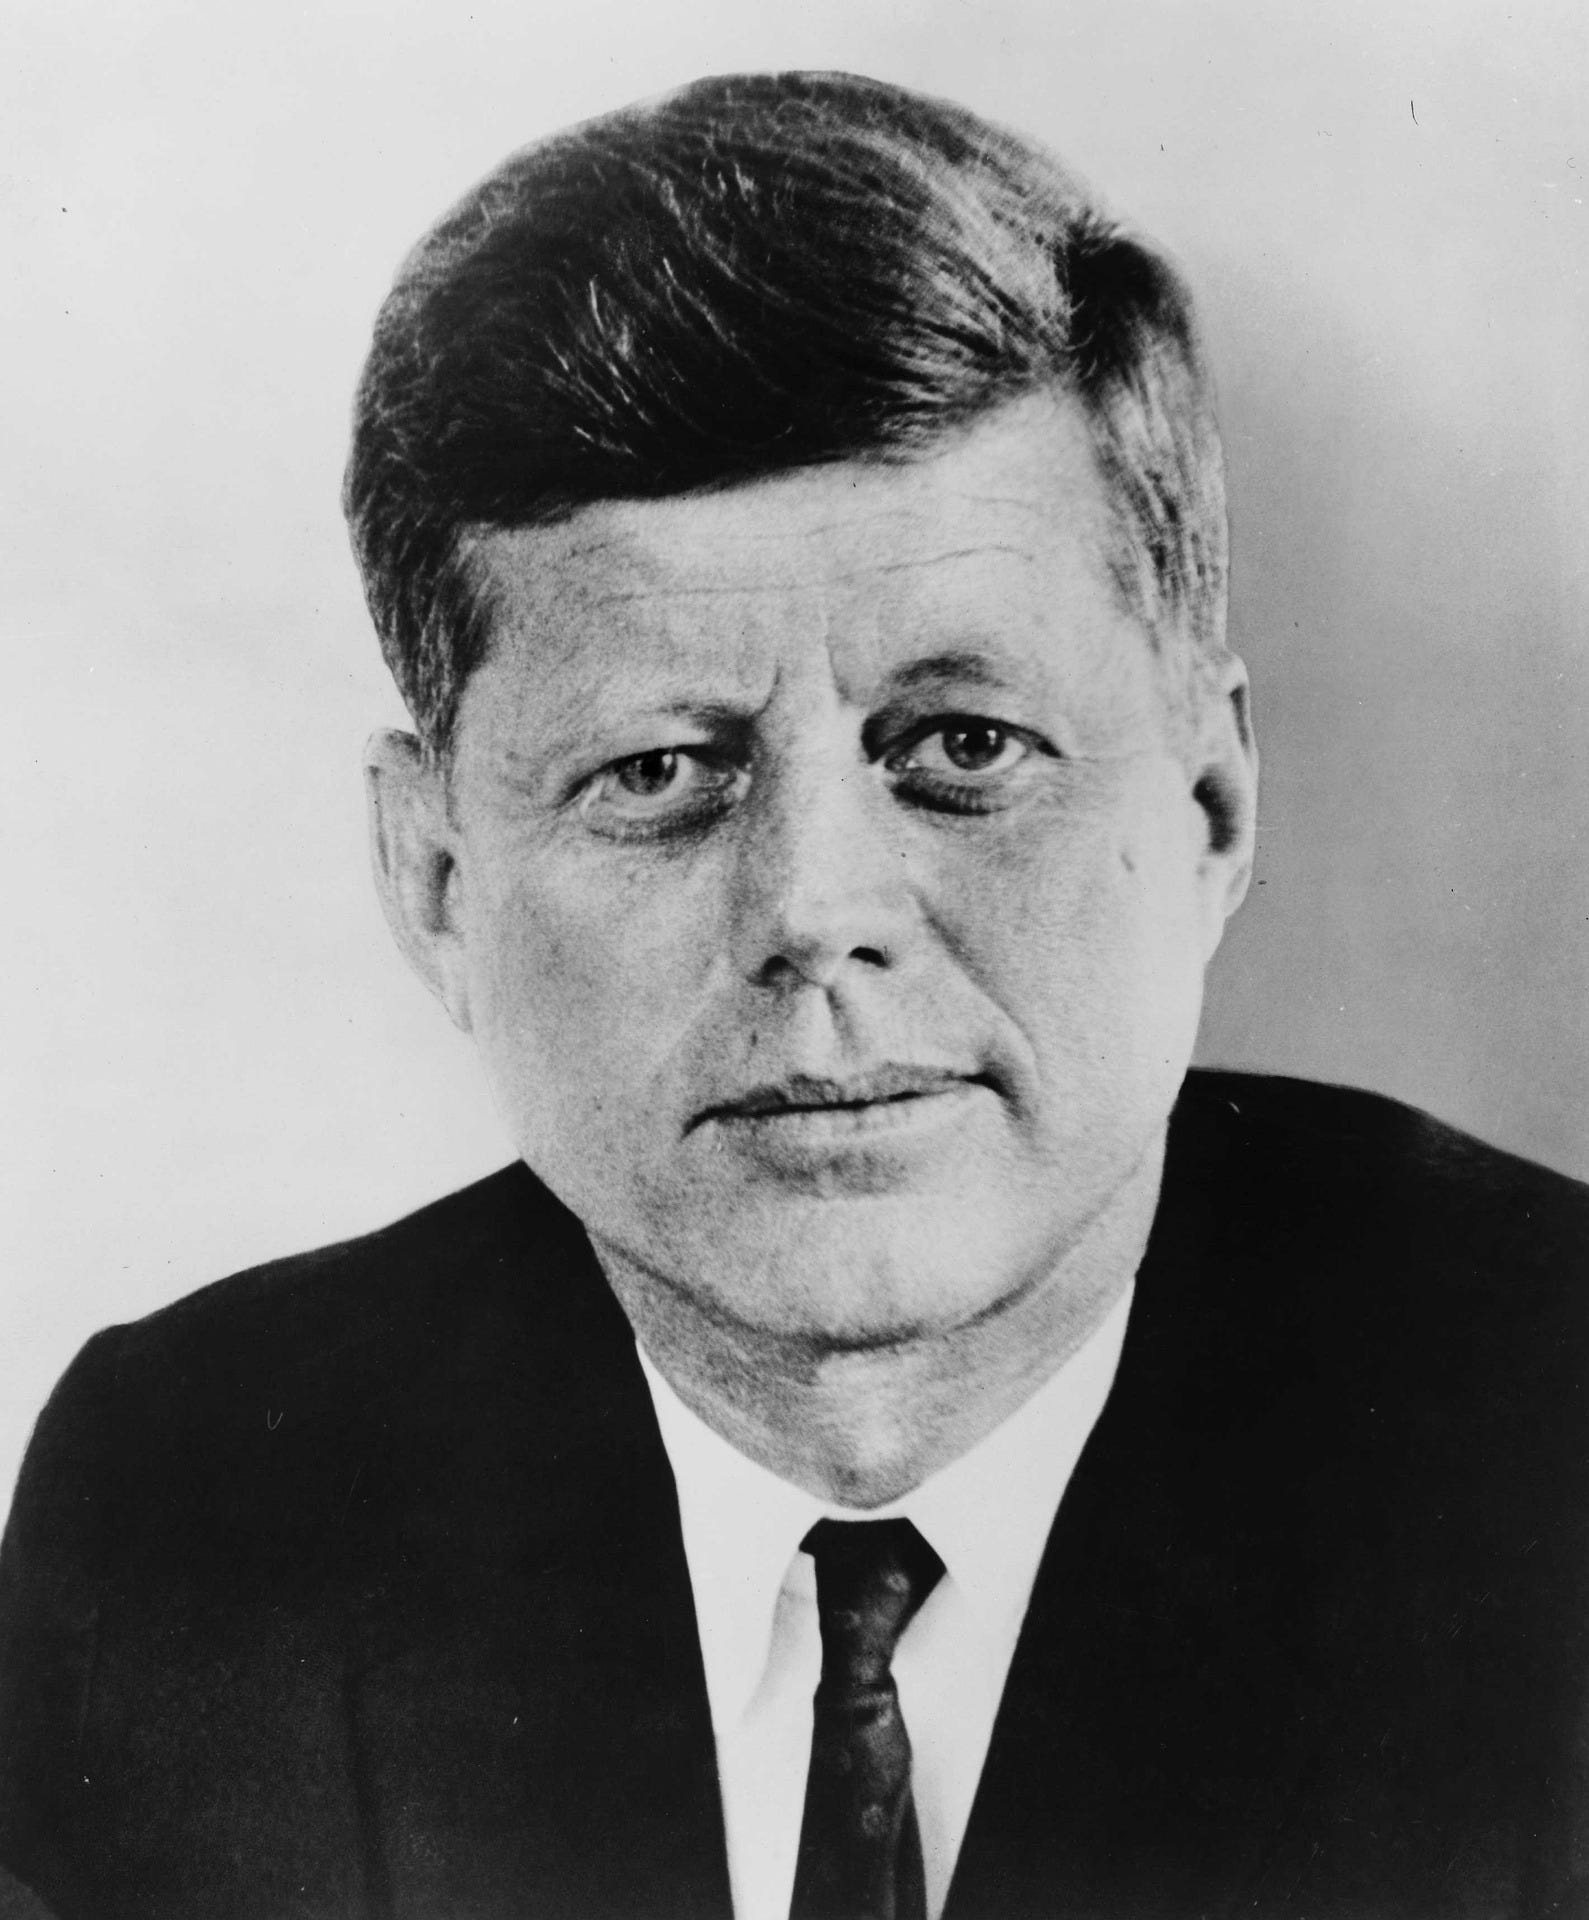 President Kennedy’s Pursuit of UFO Knowledge Resulted in his Assassina